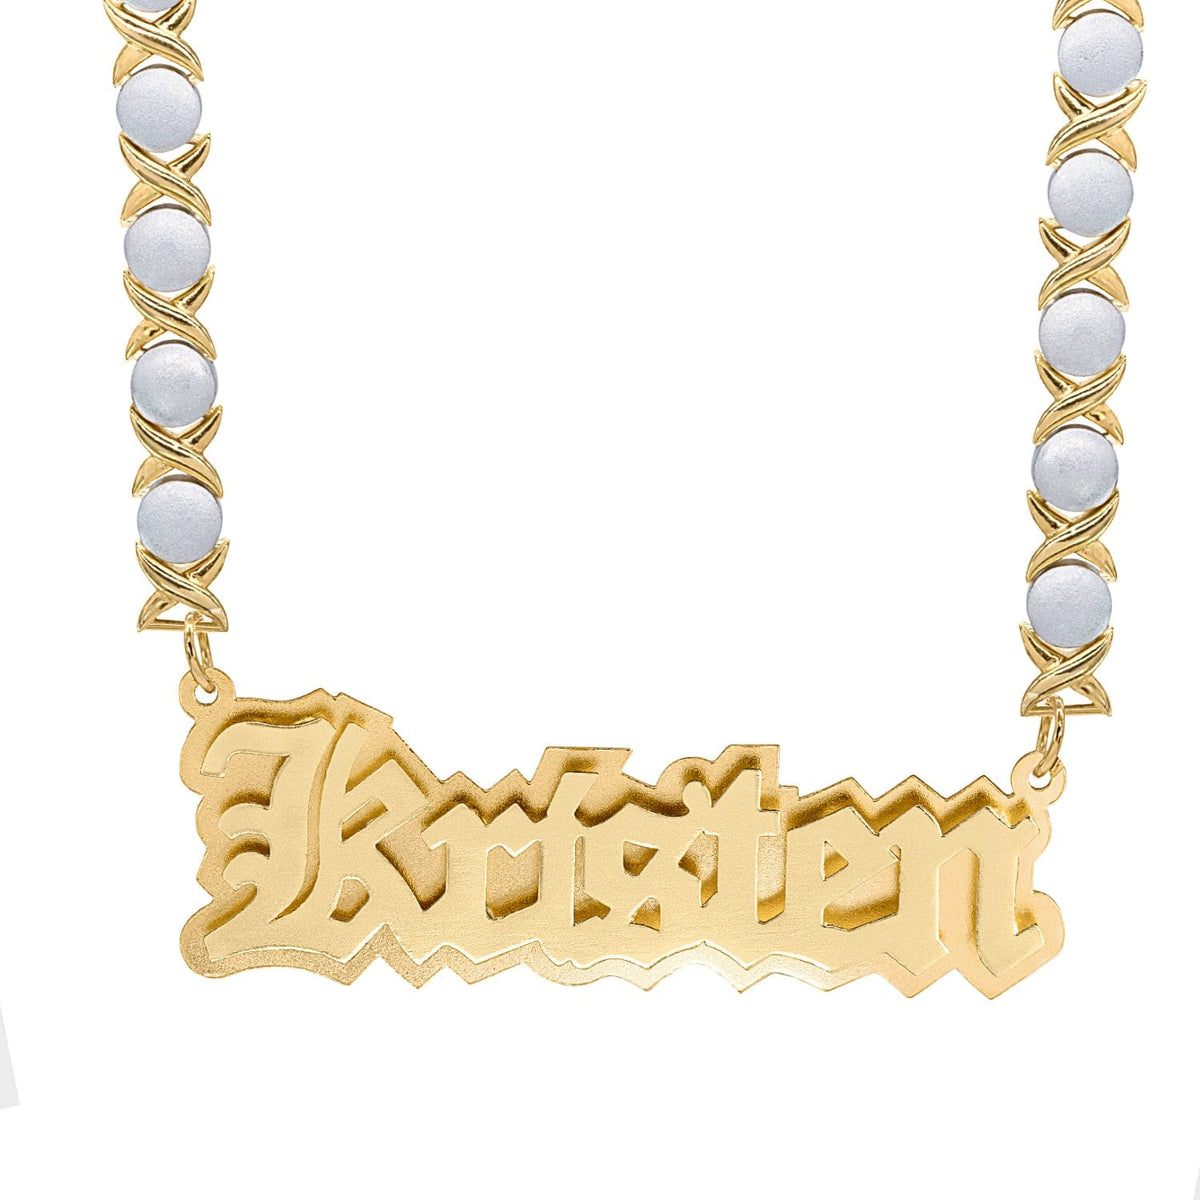 14k Gold over Sterling Silver / Rhodium Xoxo Chain Double Plated Nameplate Necklace &quot;Kristen&quot; With Rhodium Xoxo Chain